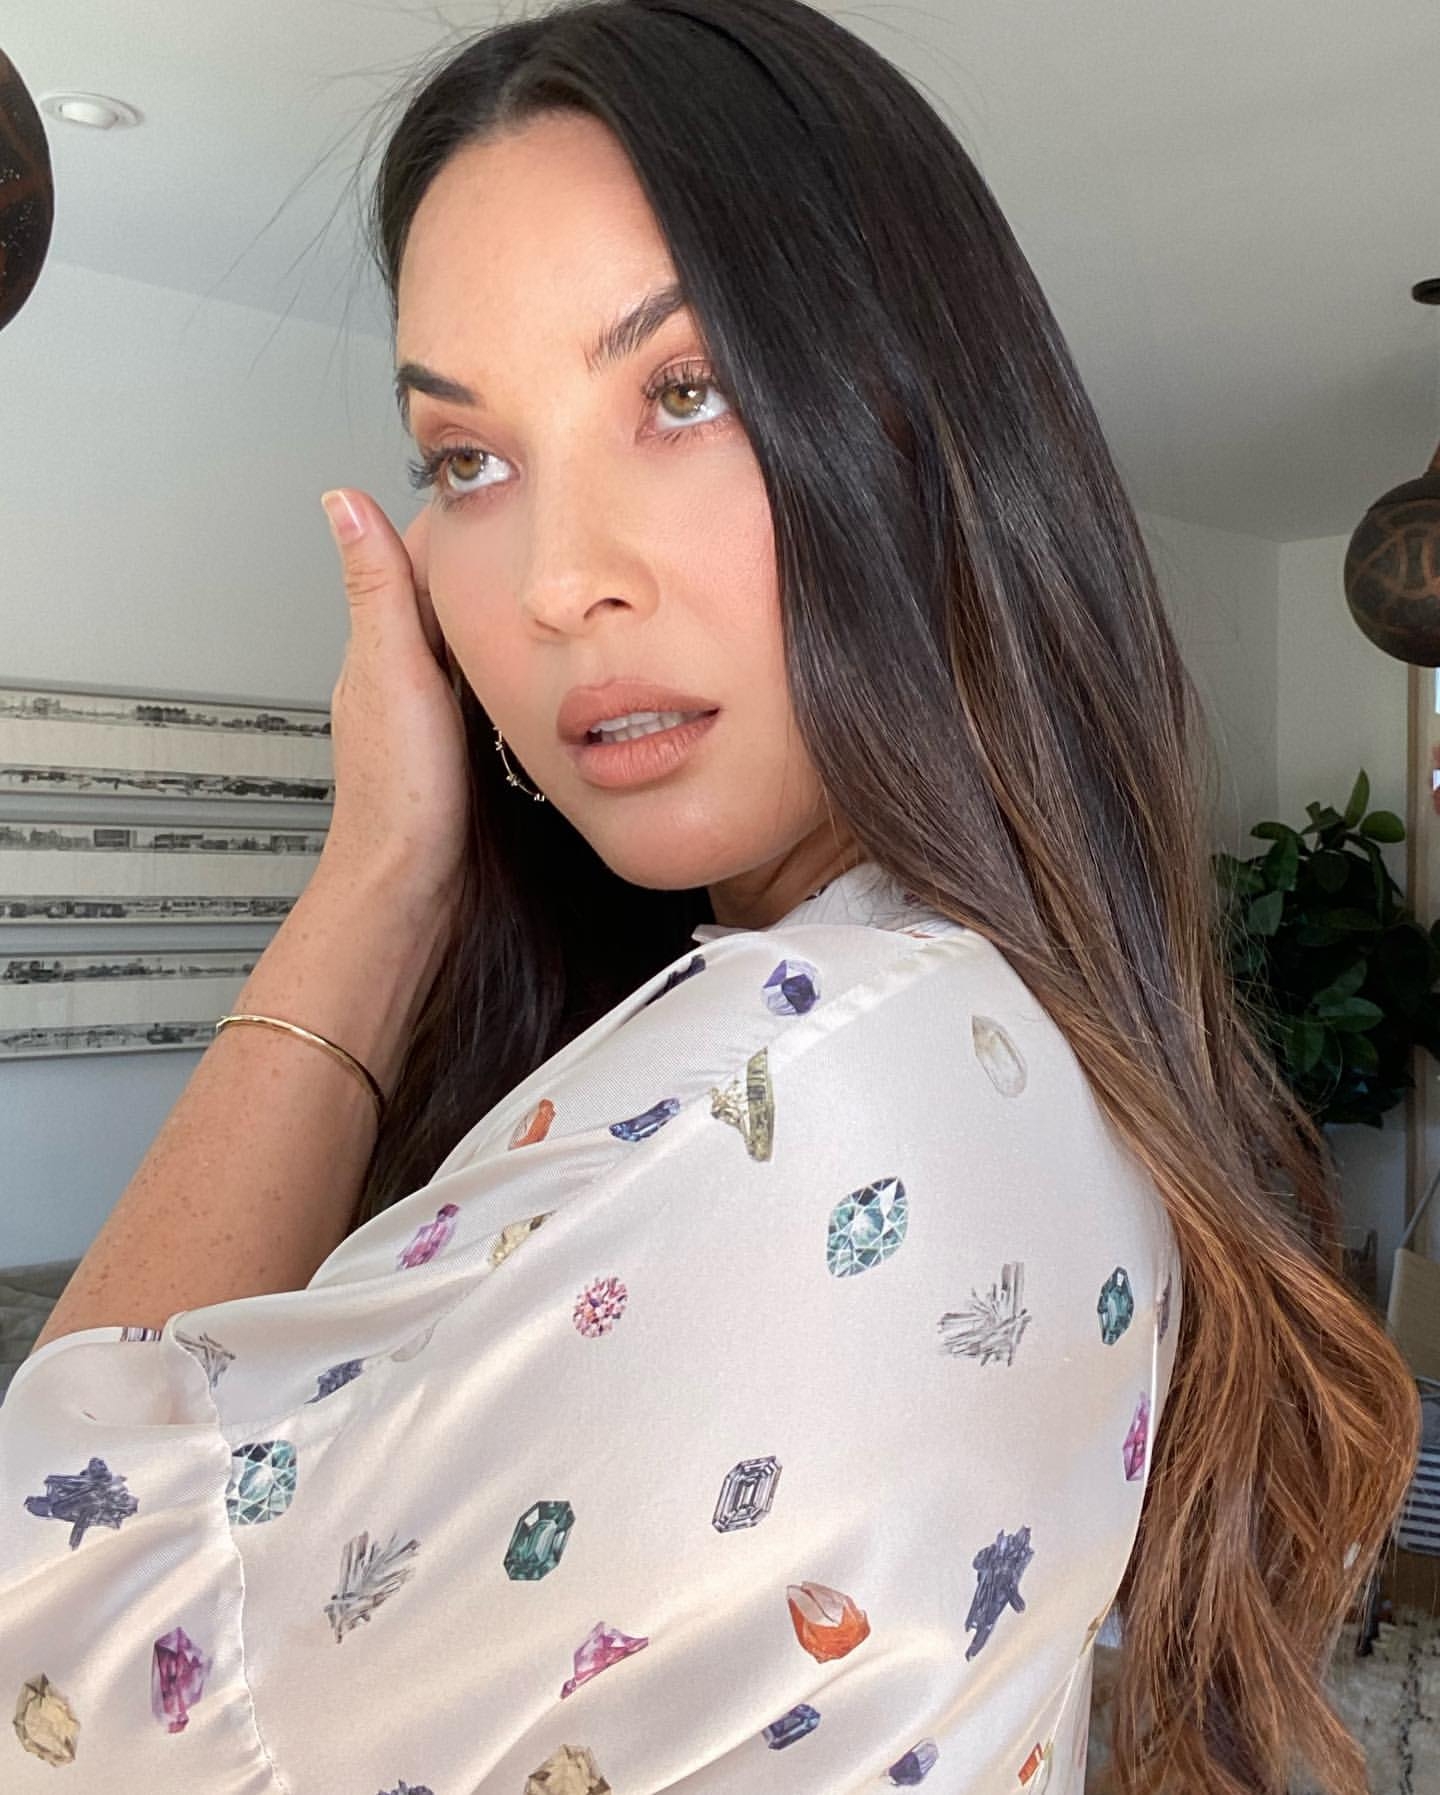 Olivia Munn Working on Her Angles!